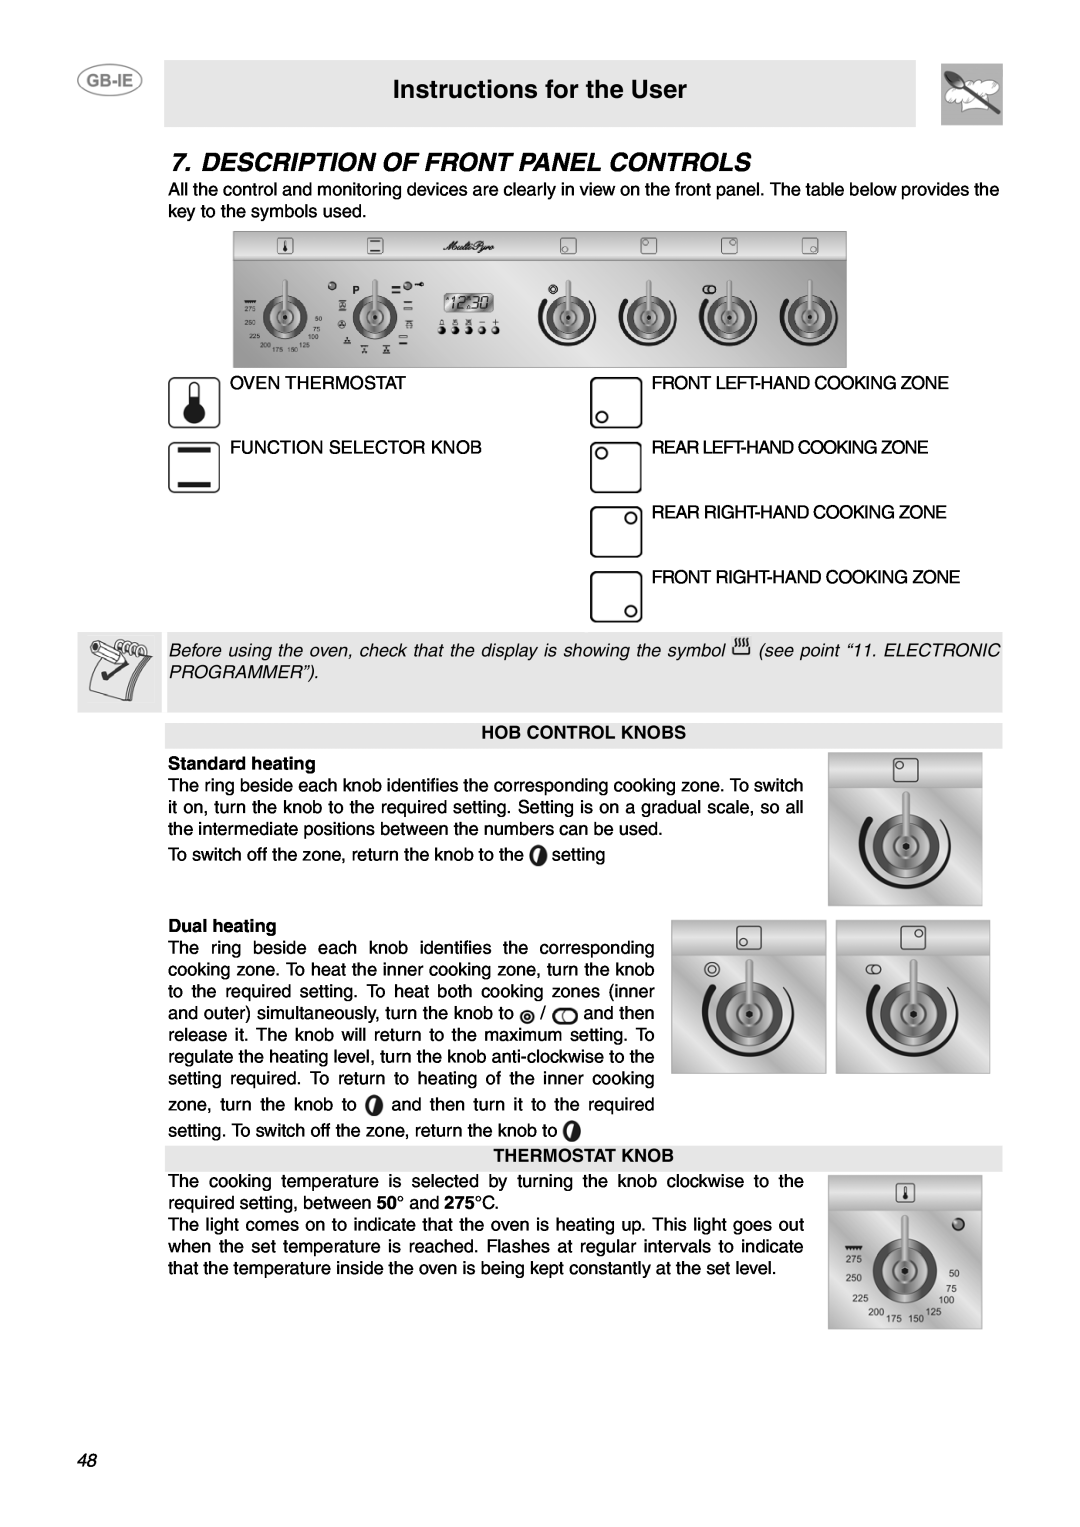 Smeg SCB66MPX5 manual Description Of Front Panel Controls, Instructions for the User, HOB CONTROL KNOBS Standard heating 